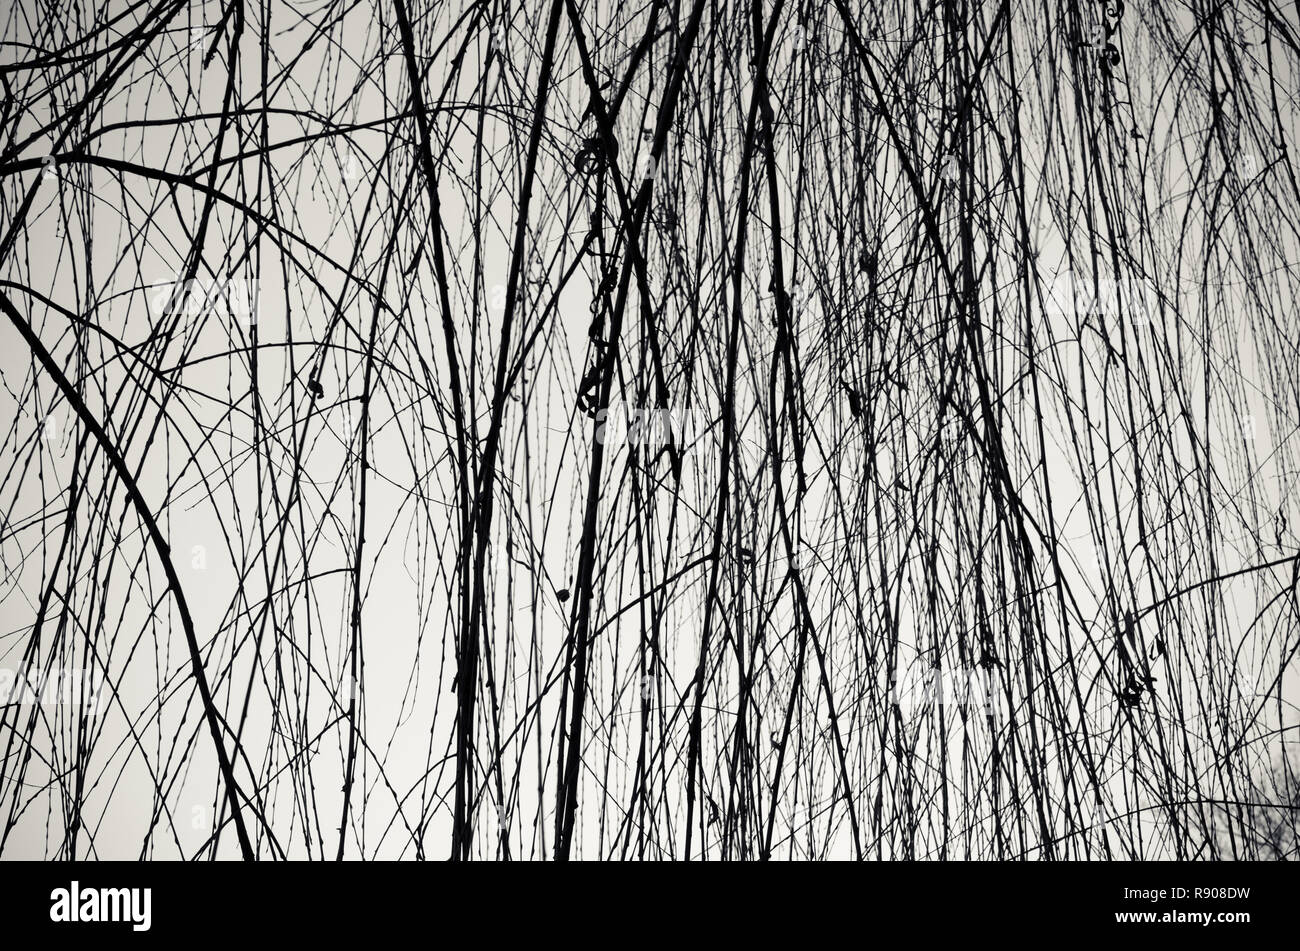 Weeping willow branchlets Stock Photo